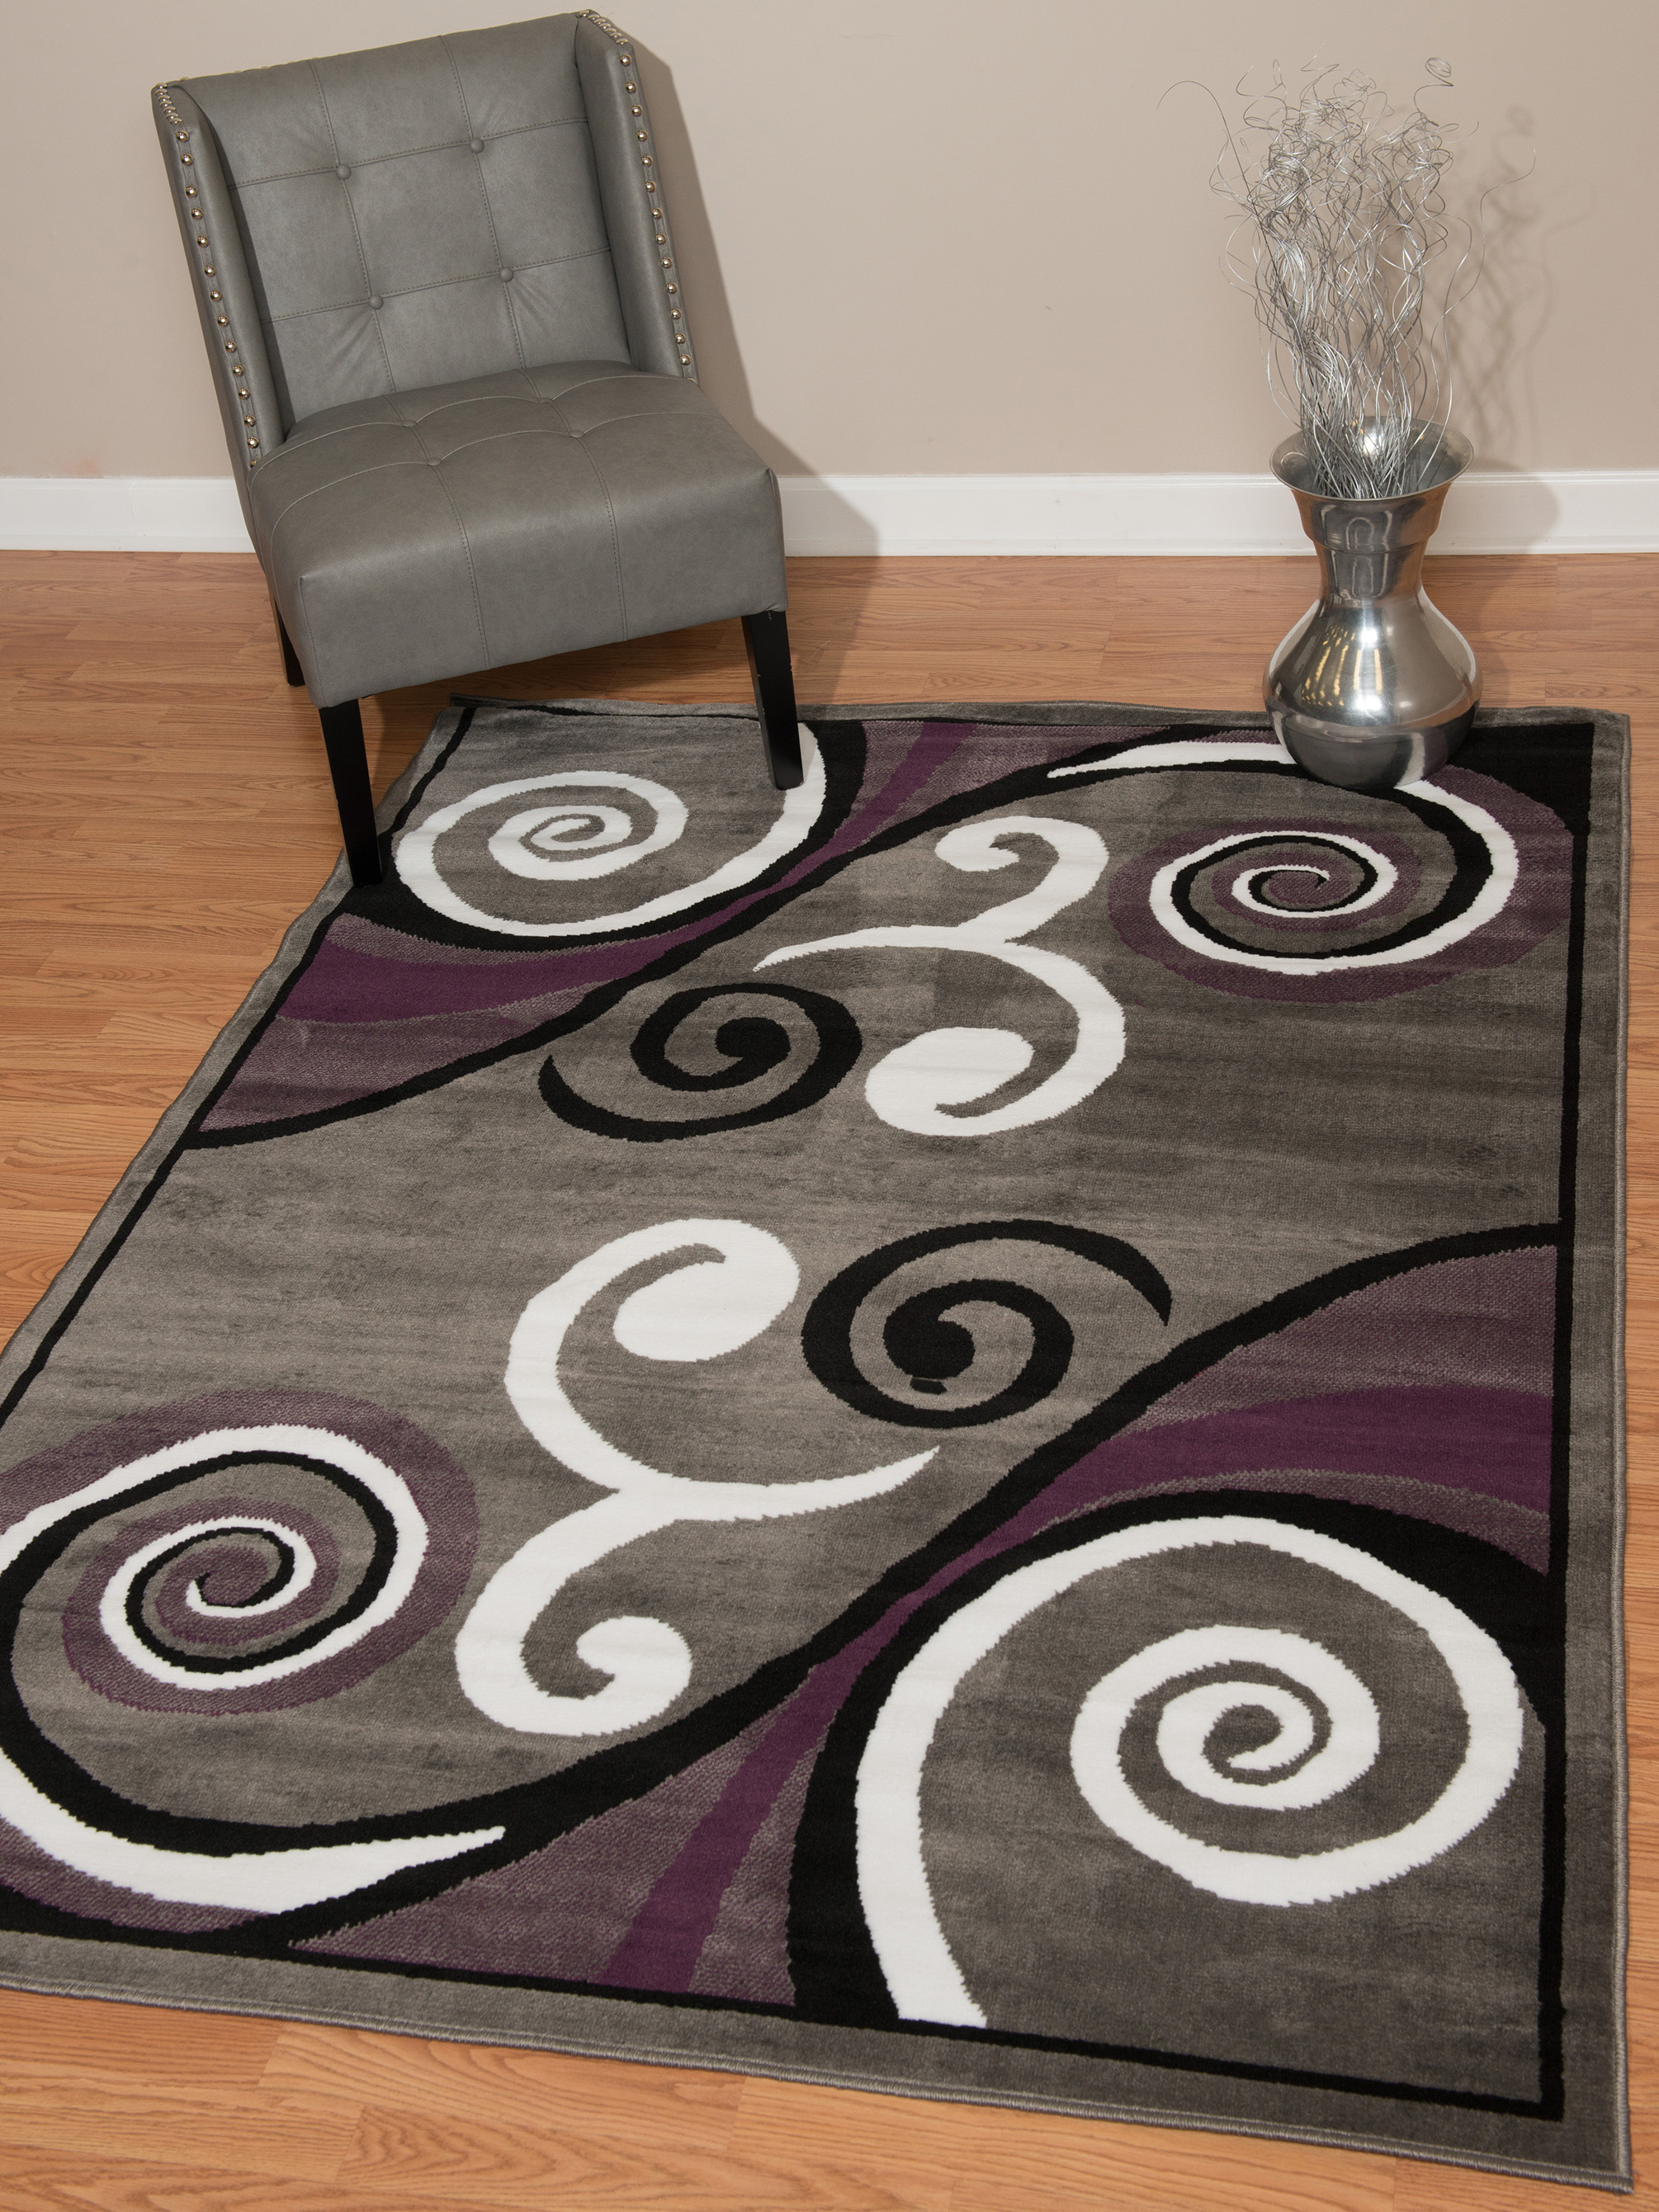 Designer Home Soft Transitional Indoor Modern Area Rug Curvy Swirls  - Actual Size: 5' 3" x 7' 2" Rectangle (Grey) - image 1 of 5